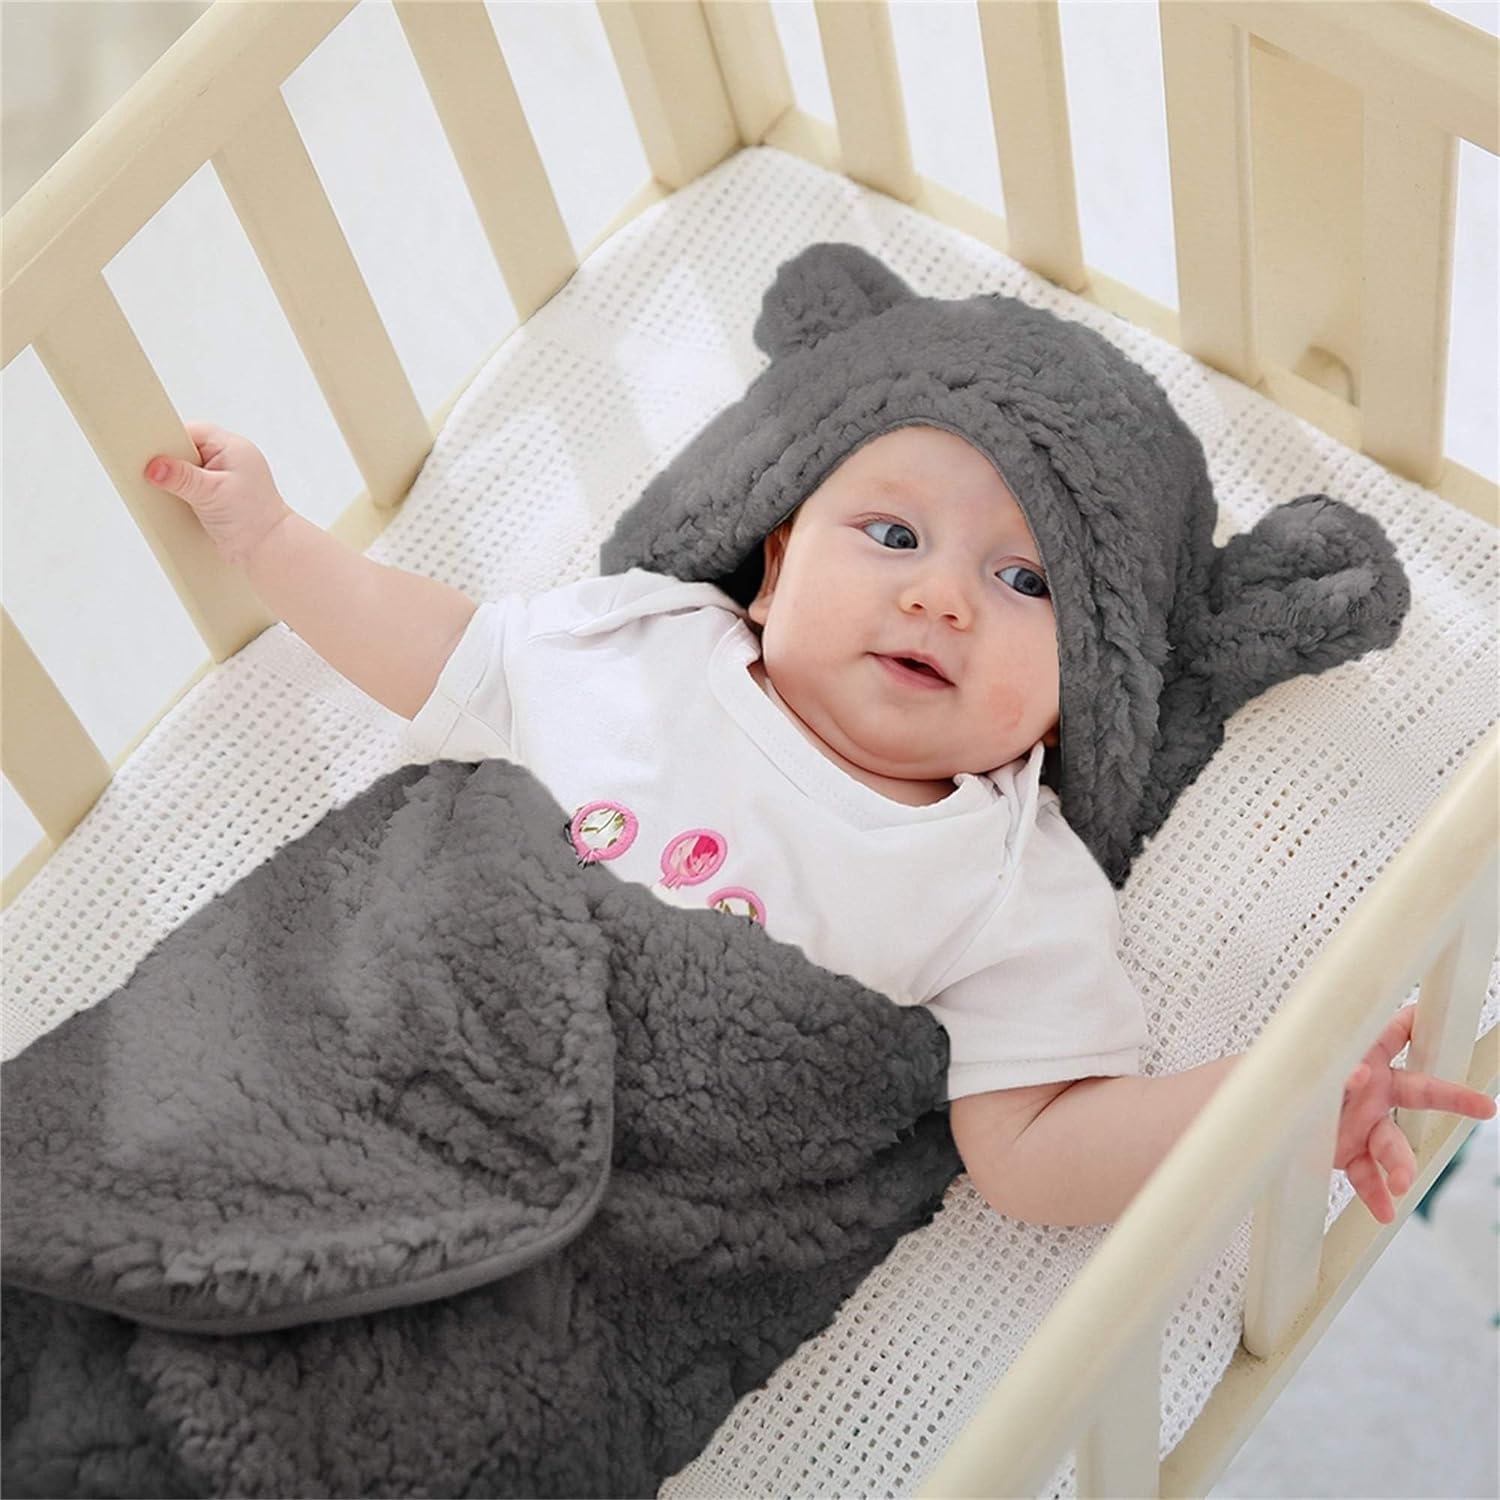 Baby Swaddle Blanket, ELECDON Ultra-Soft Plush Essential for Infants 0-6 Months, Receiving Swaddling Wrap, Ideal Newborn Registry and Toddler Boy Accessories, Perfect Baby Girl Shower Gift (Brown)